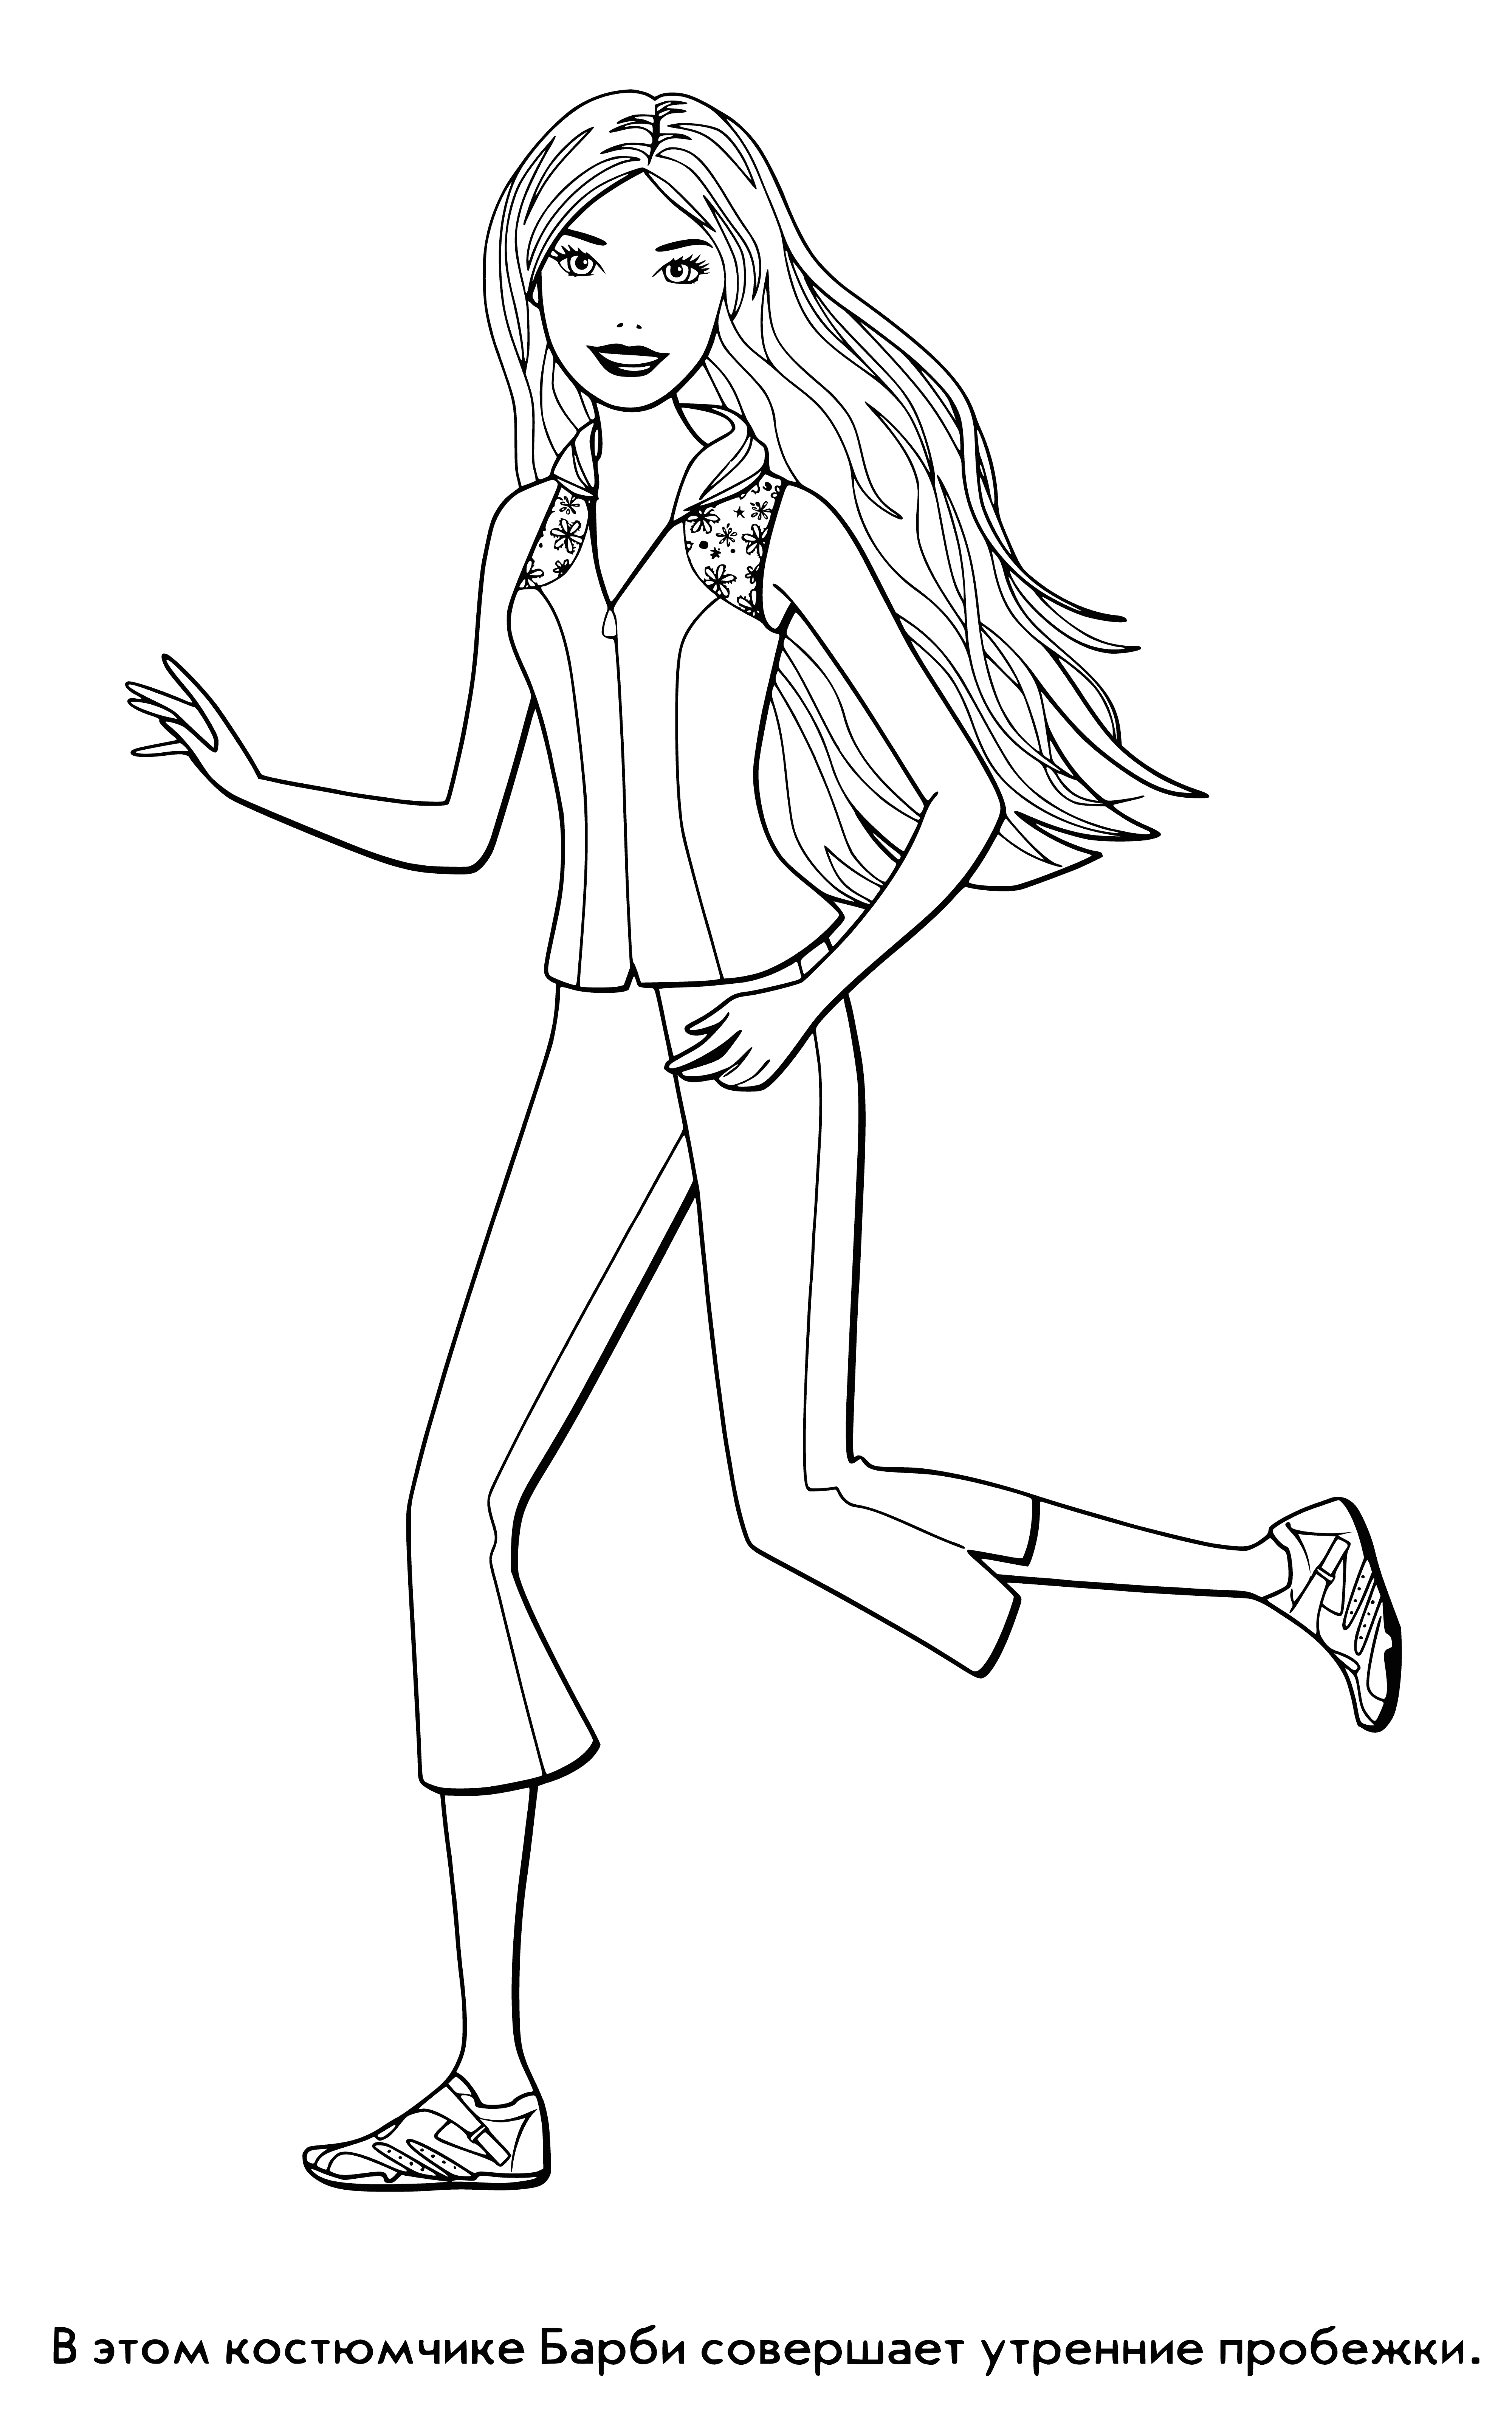 Morning running coloring page